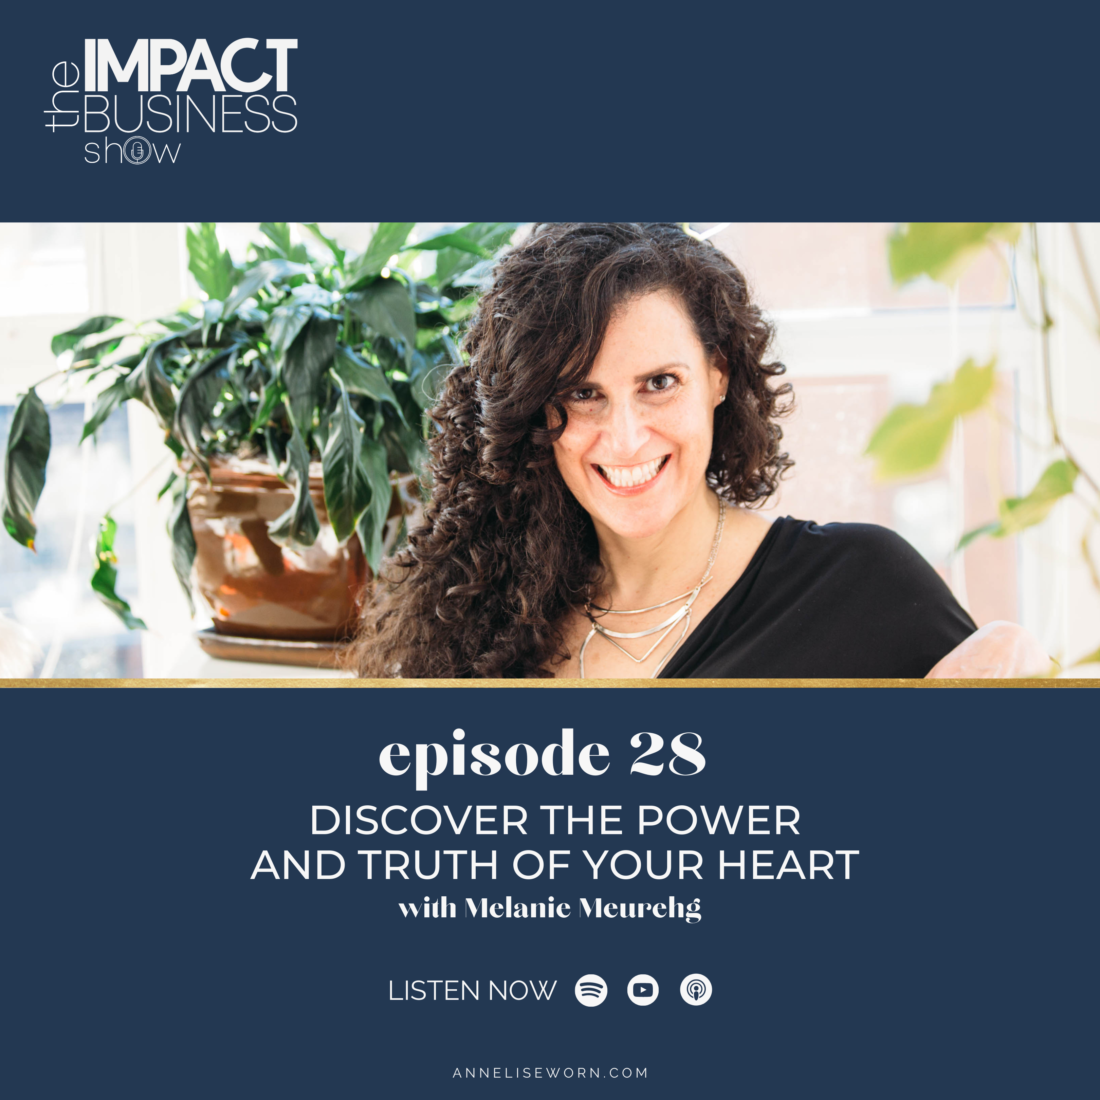 IMPACT BUSINESS SHOW Episode 28 Discover The Power And Truth Of Your Heart with Melanie Meurheg